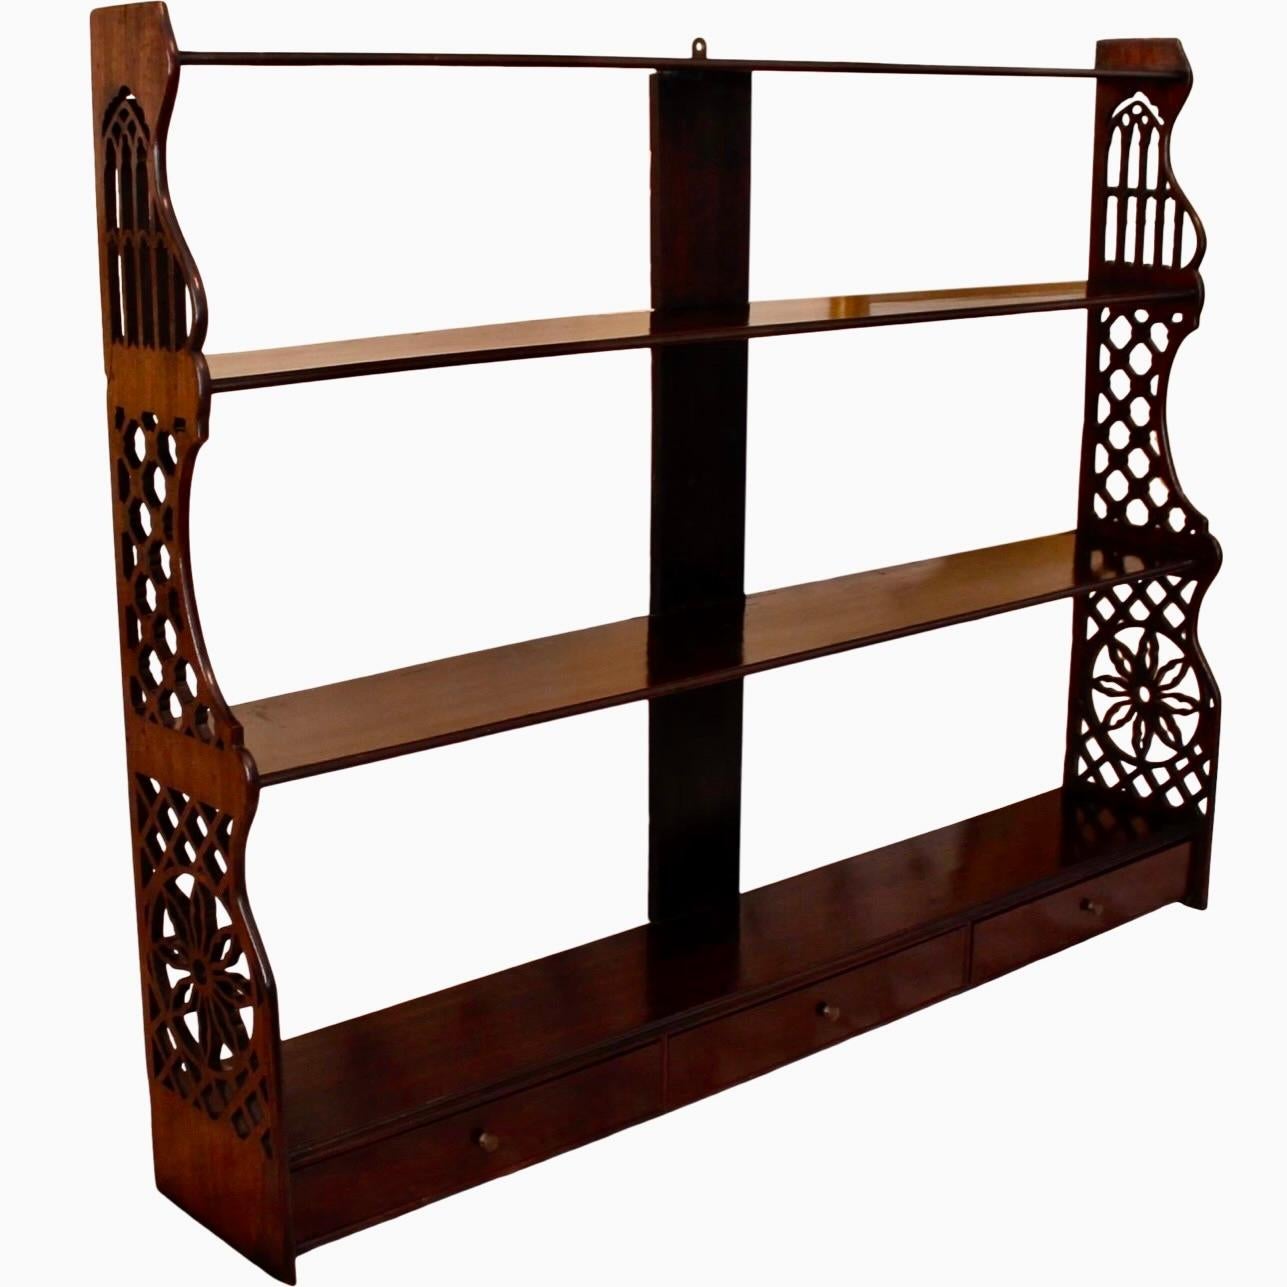 A fine George III period hanging shelf with fretwork sides and three drawers at the bottom. Four shelves are enlivened by different fret design at each level, the uppermost fitting Neo-Gothic tracery into the tapering silhouette off the sides. Good